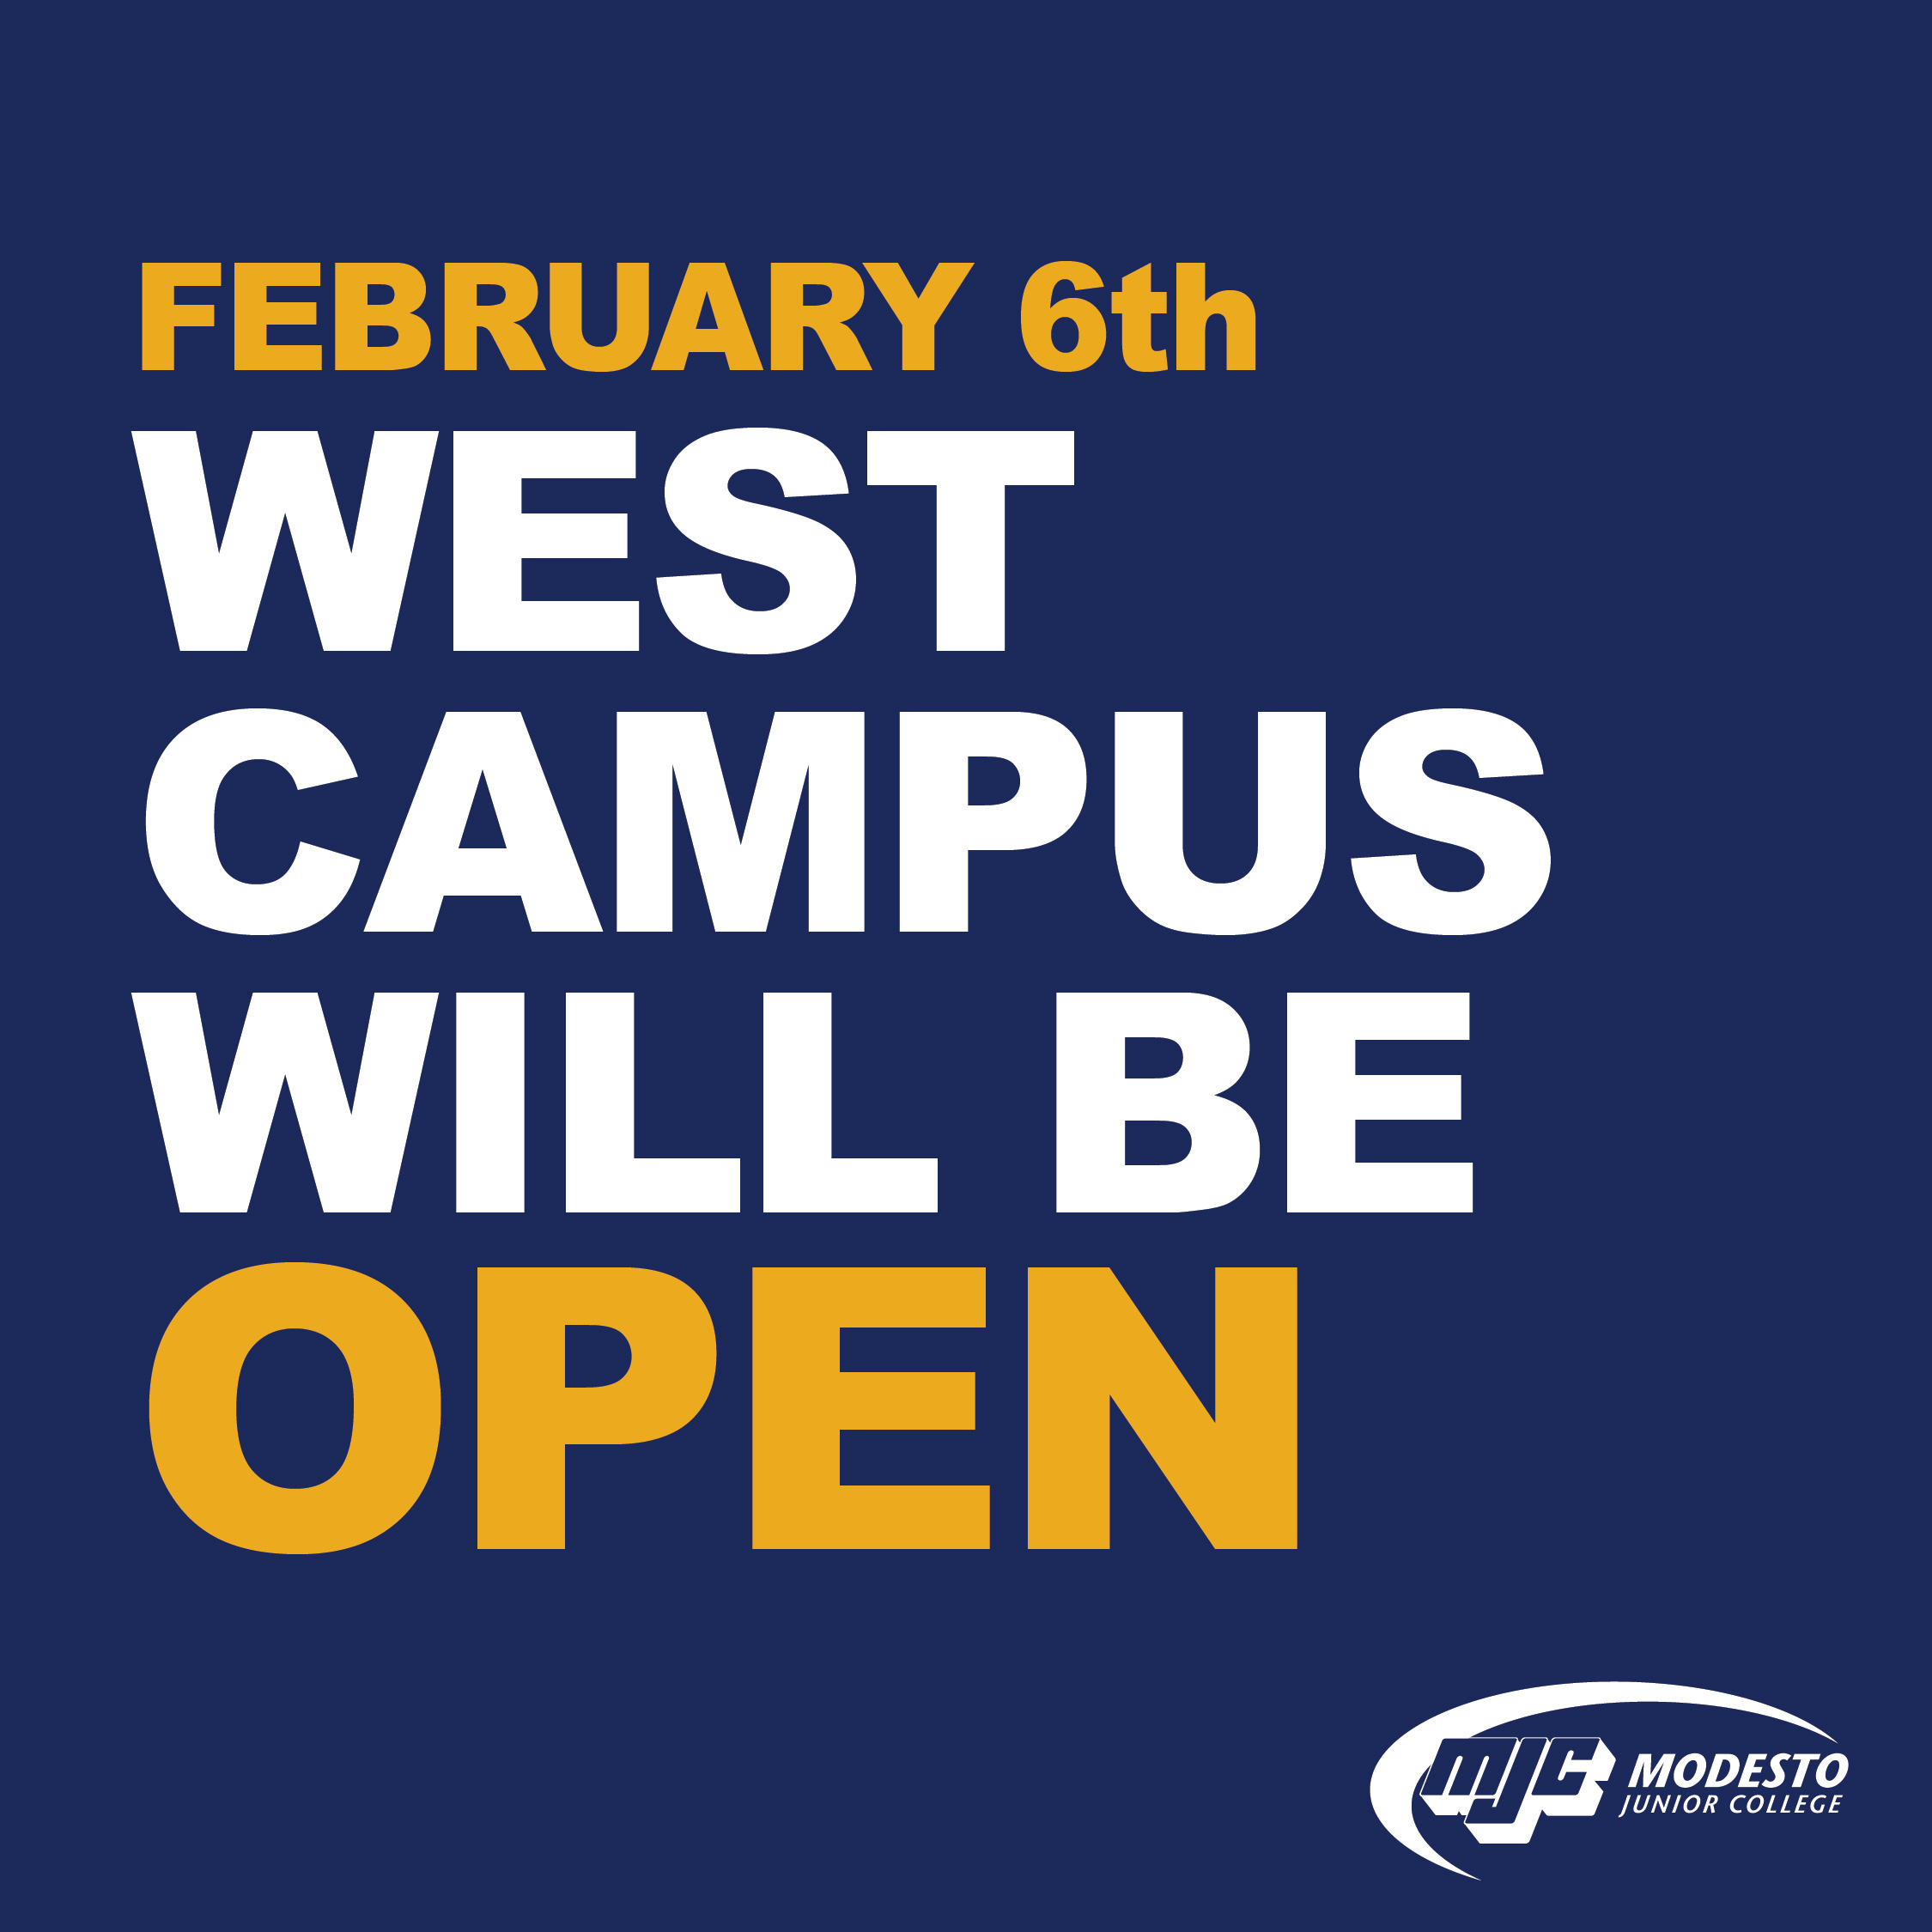 MJC West Campus is Open February 6th